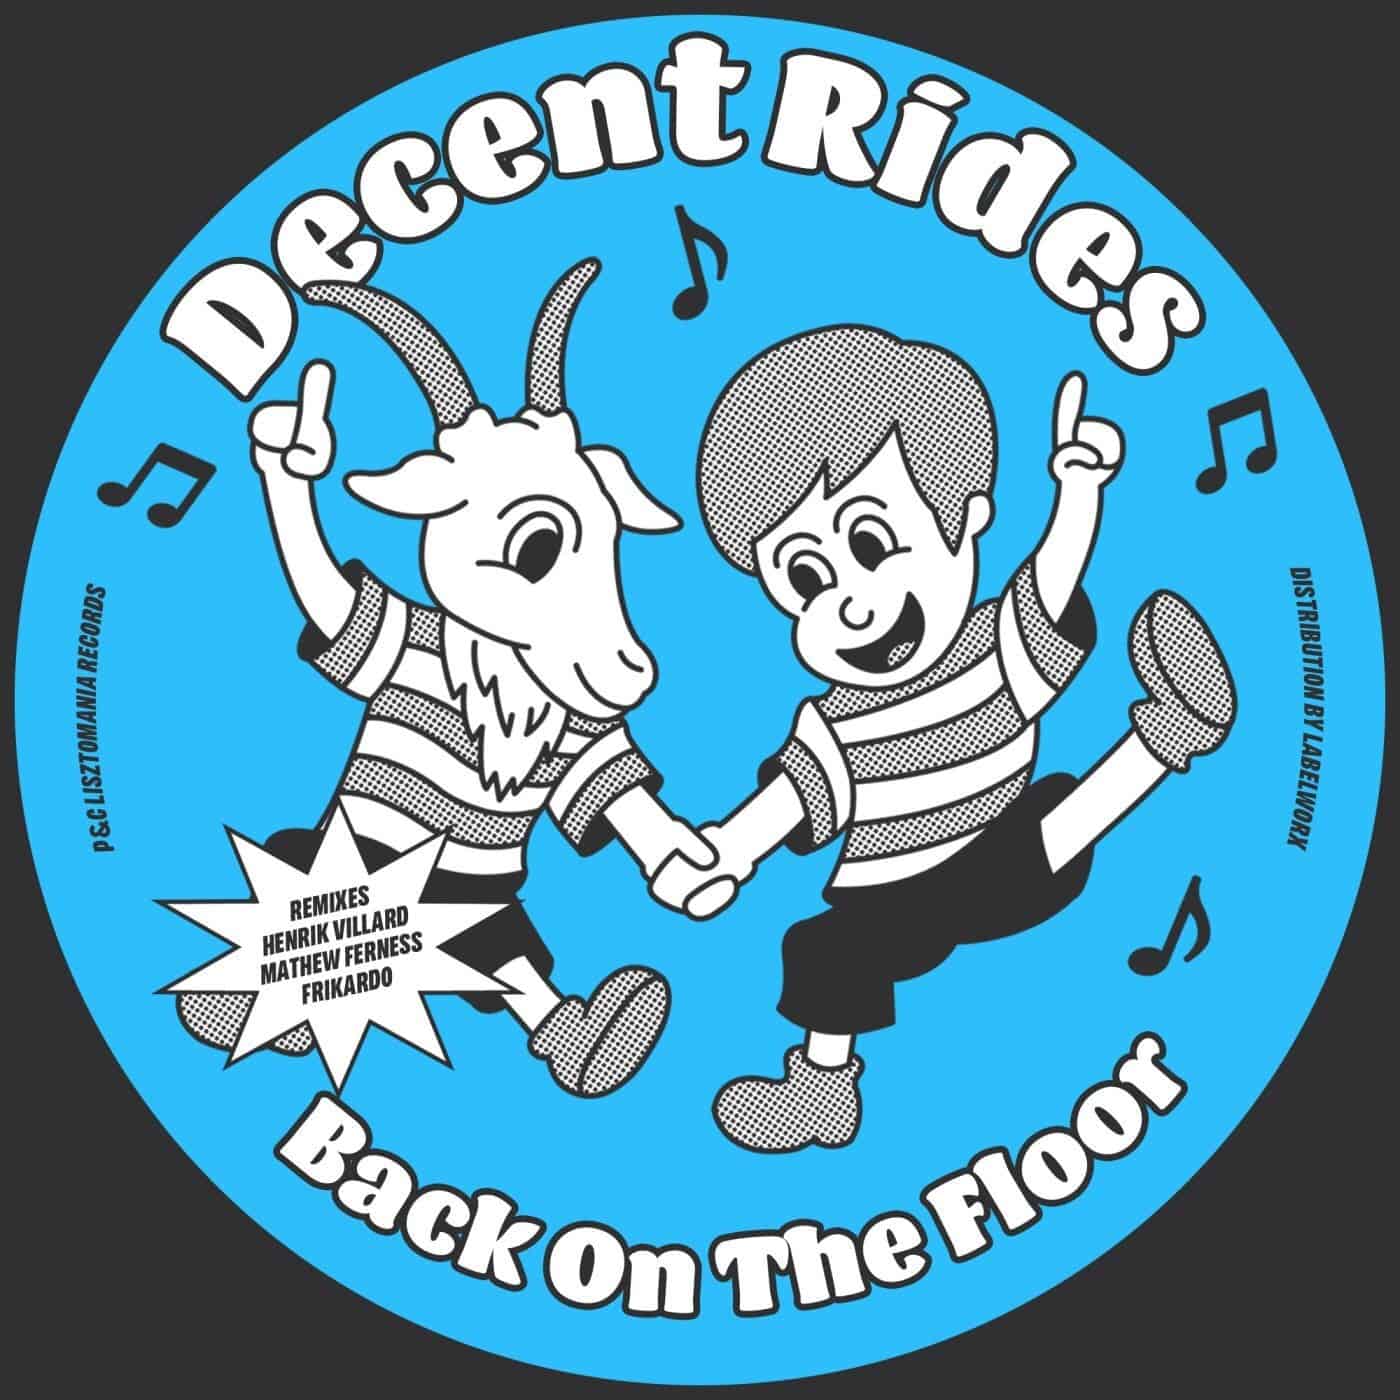 Download Decent Rides - Back On The Floor (Remixes) on Electrobuzz